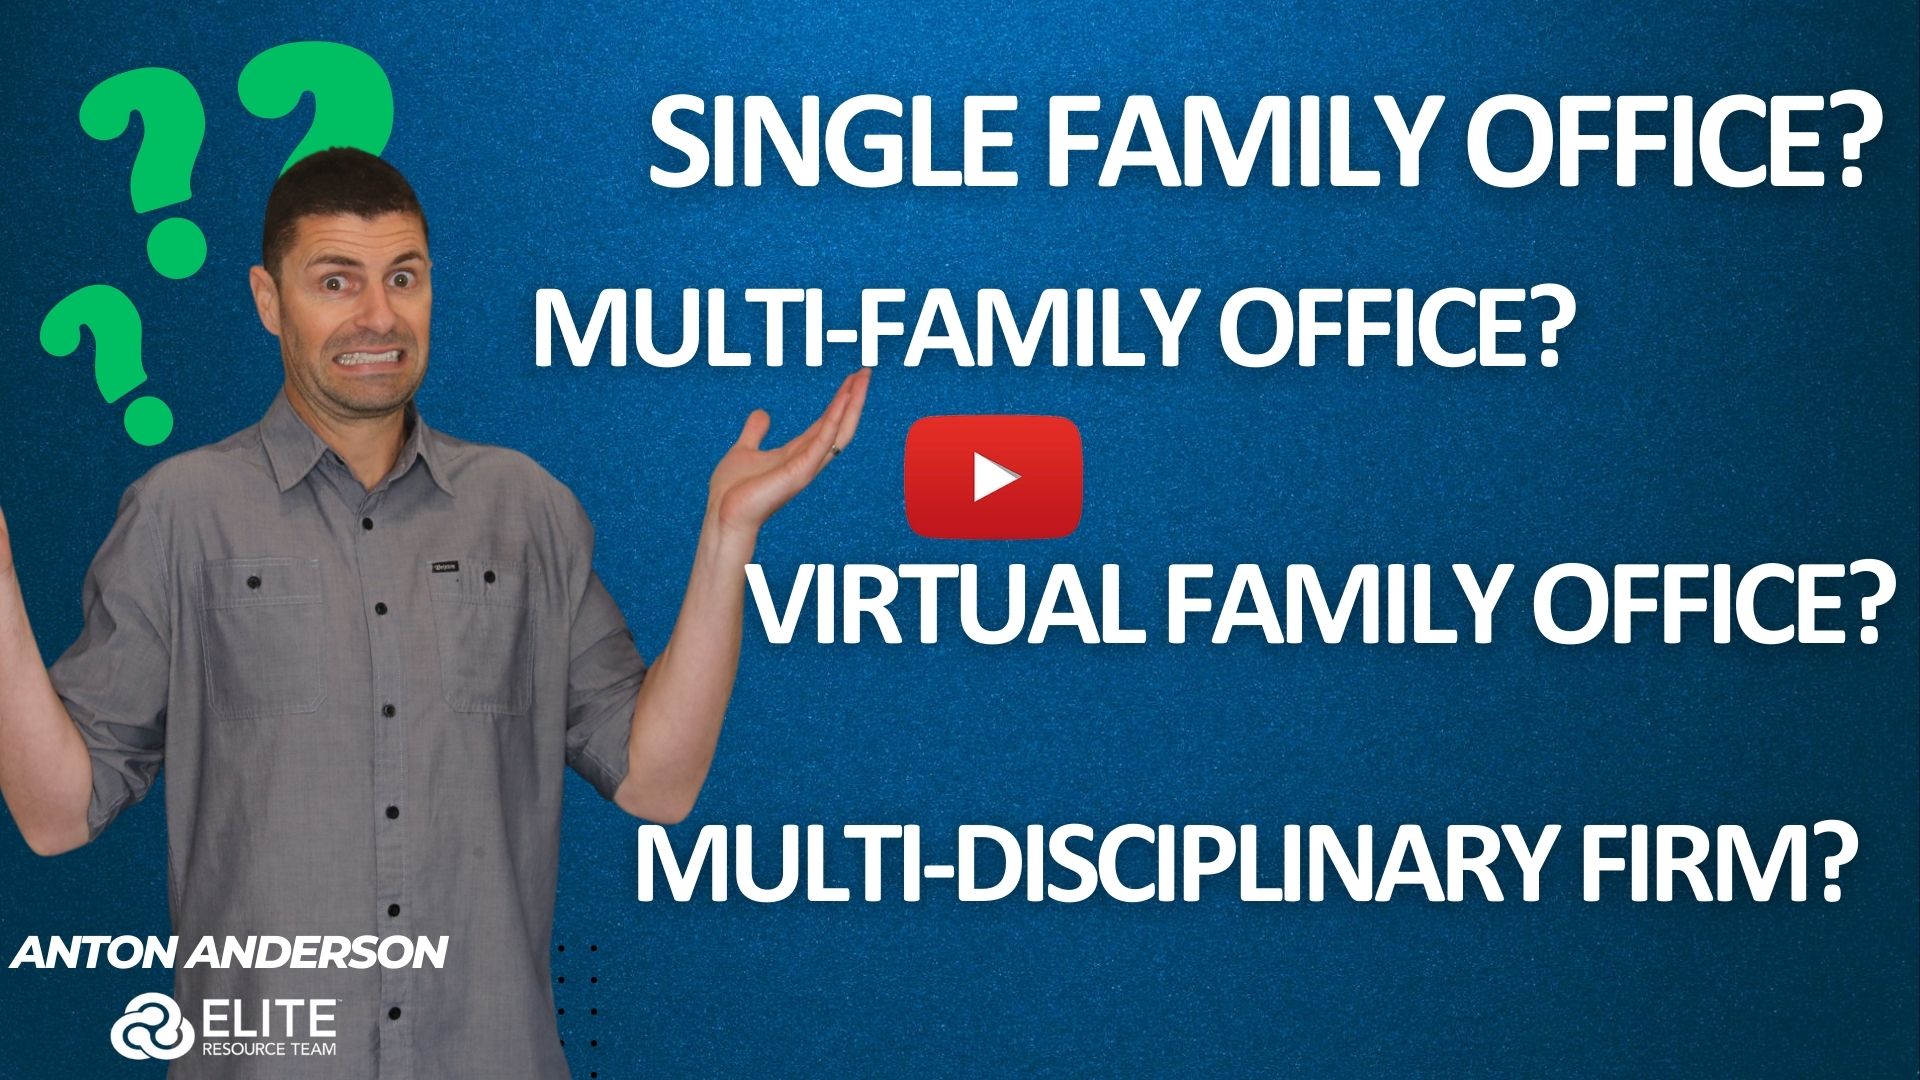 WHAT IS A FAMILY OFFICE? A MULTIFAMILY OFFICE? A VIRTUAL FAMILY OFFICE?